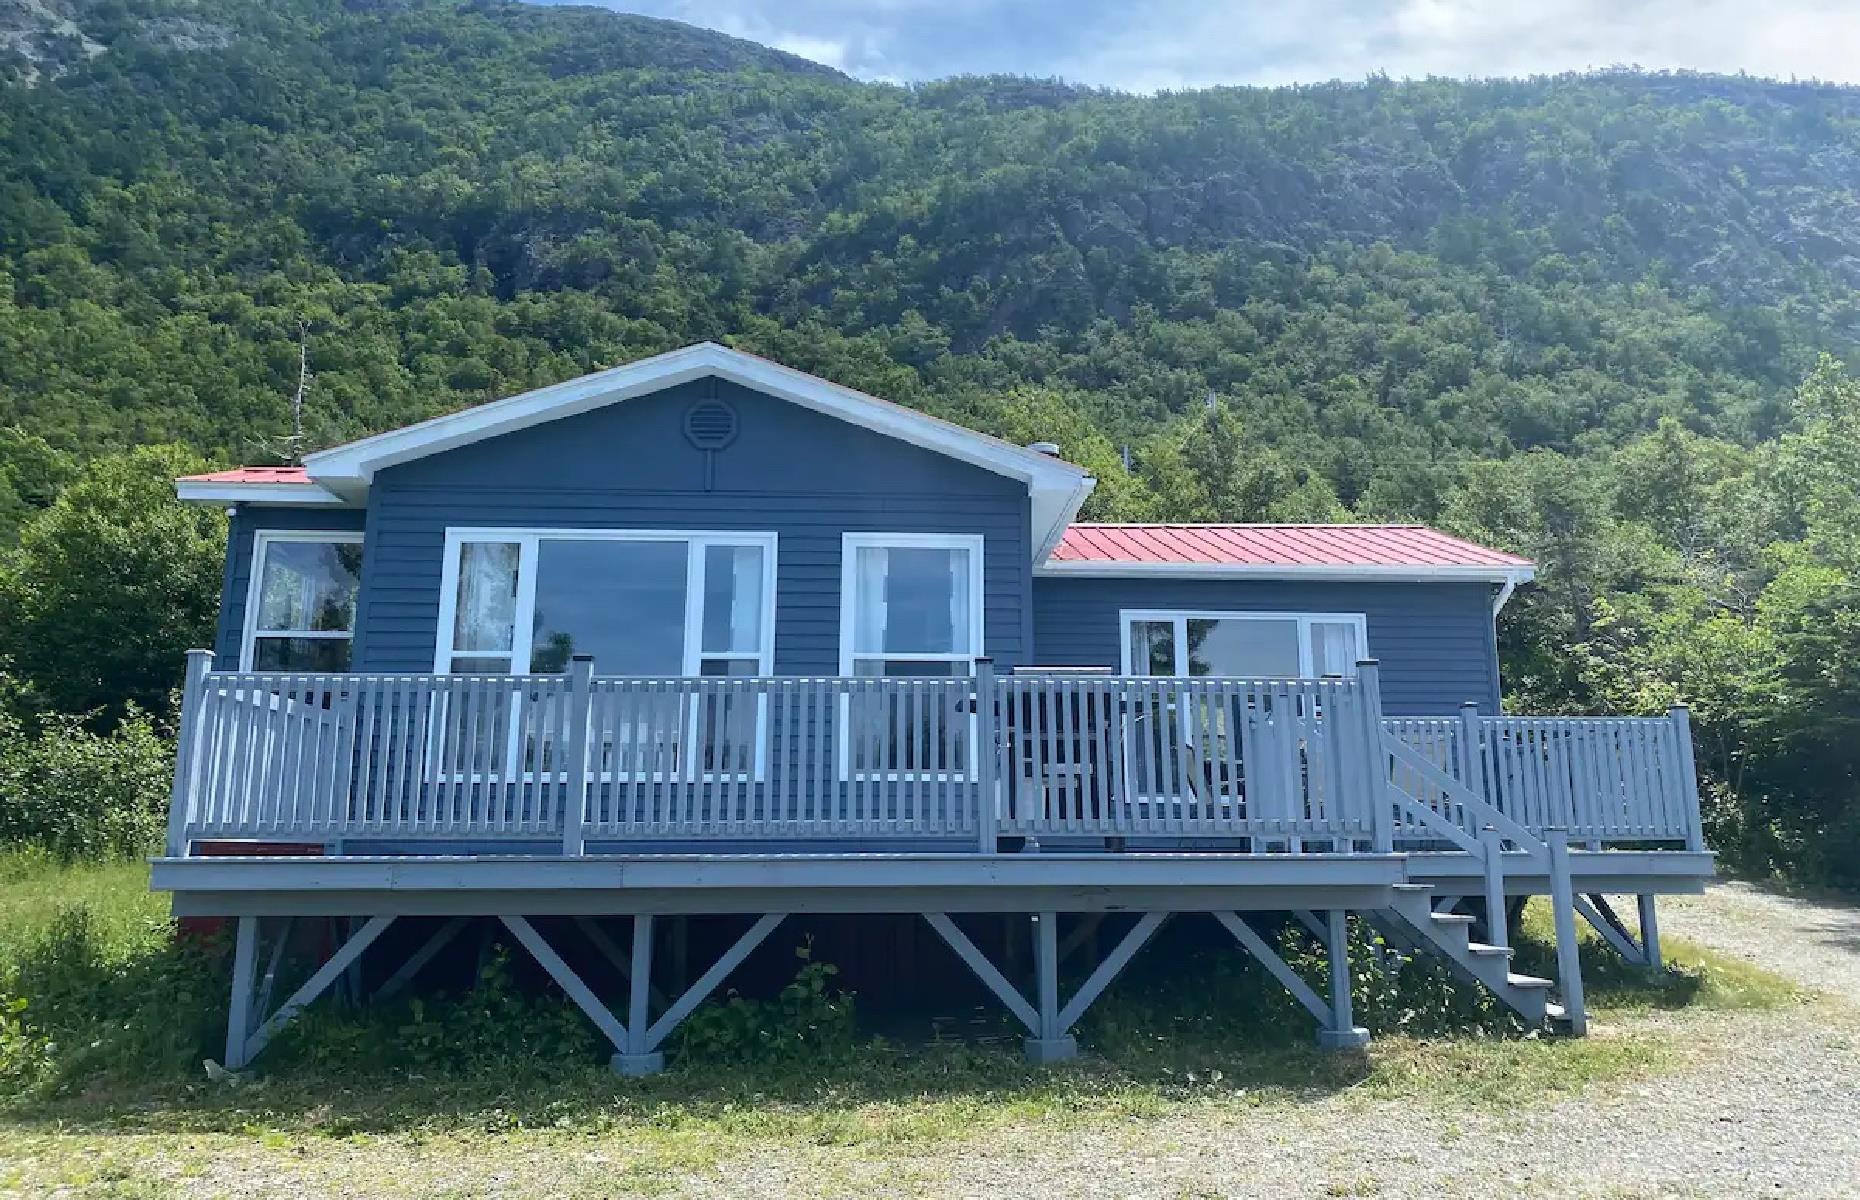 <p>All of the province of Newfoundland and Labrador is fairly remote relative to the rest of North America, but this <a href="https://www.airbnb.co.uk/rooms/39123645?adults=1&children=0&infants=0&check_in=2022-10-11&check_out=2022-10-18&federated_search_id=b75094e7-a395-4d62-8ccf-b7fc6ce41e92&source_impression_id=p3_1662925069_jP%2Bydm4P%2FSoGw%2FJi">homey cottage</a> on the island’s southwest shore offers even more room to breathe. On the shore of the Bay of Islands, the views from the house are incredible, especially in the evening when guests can sit by the fire pit and watch the sun go down. One bedroom and three beds (including a bunk bed) makes this one big enough for five people on a family getaway.</p>